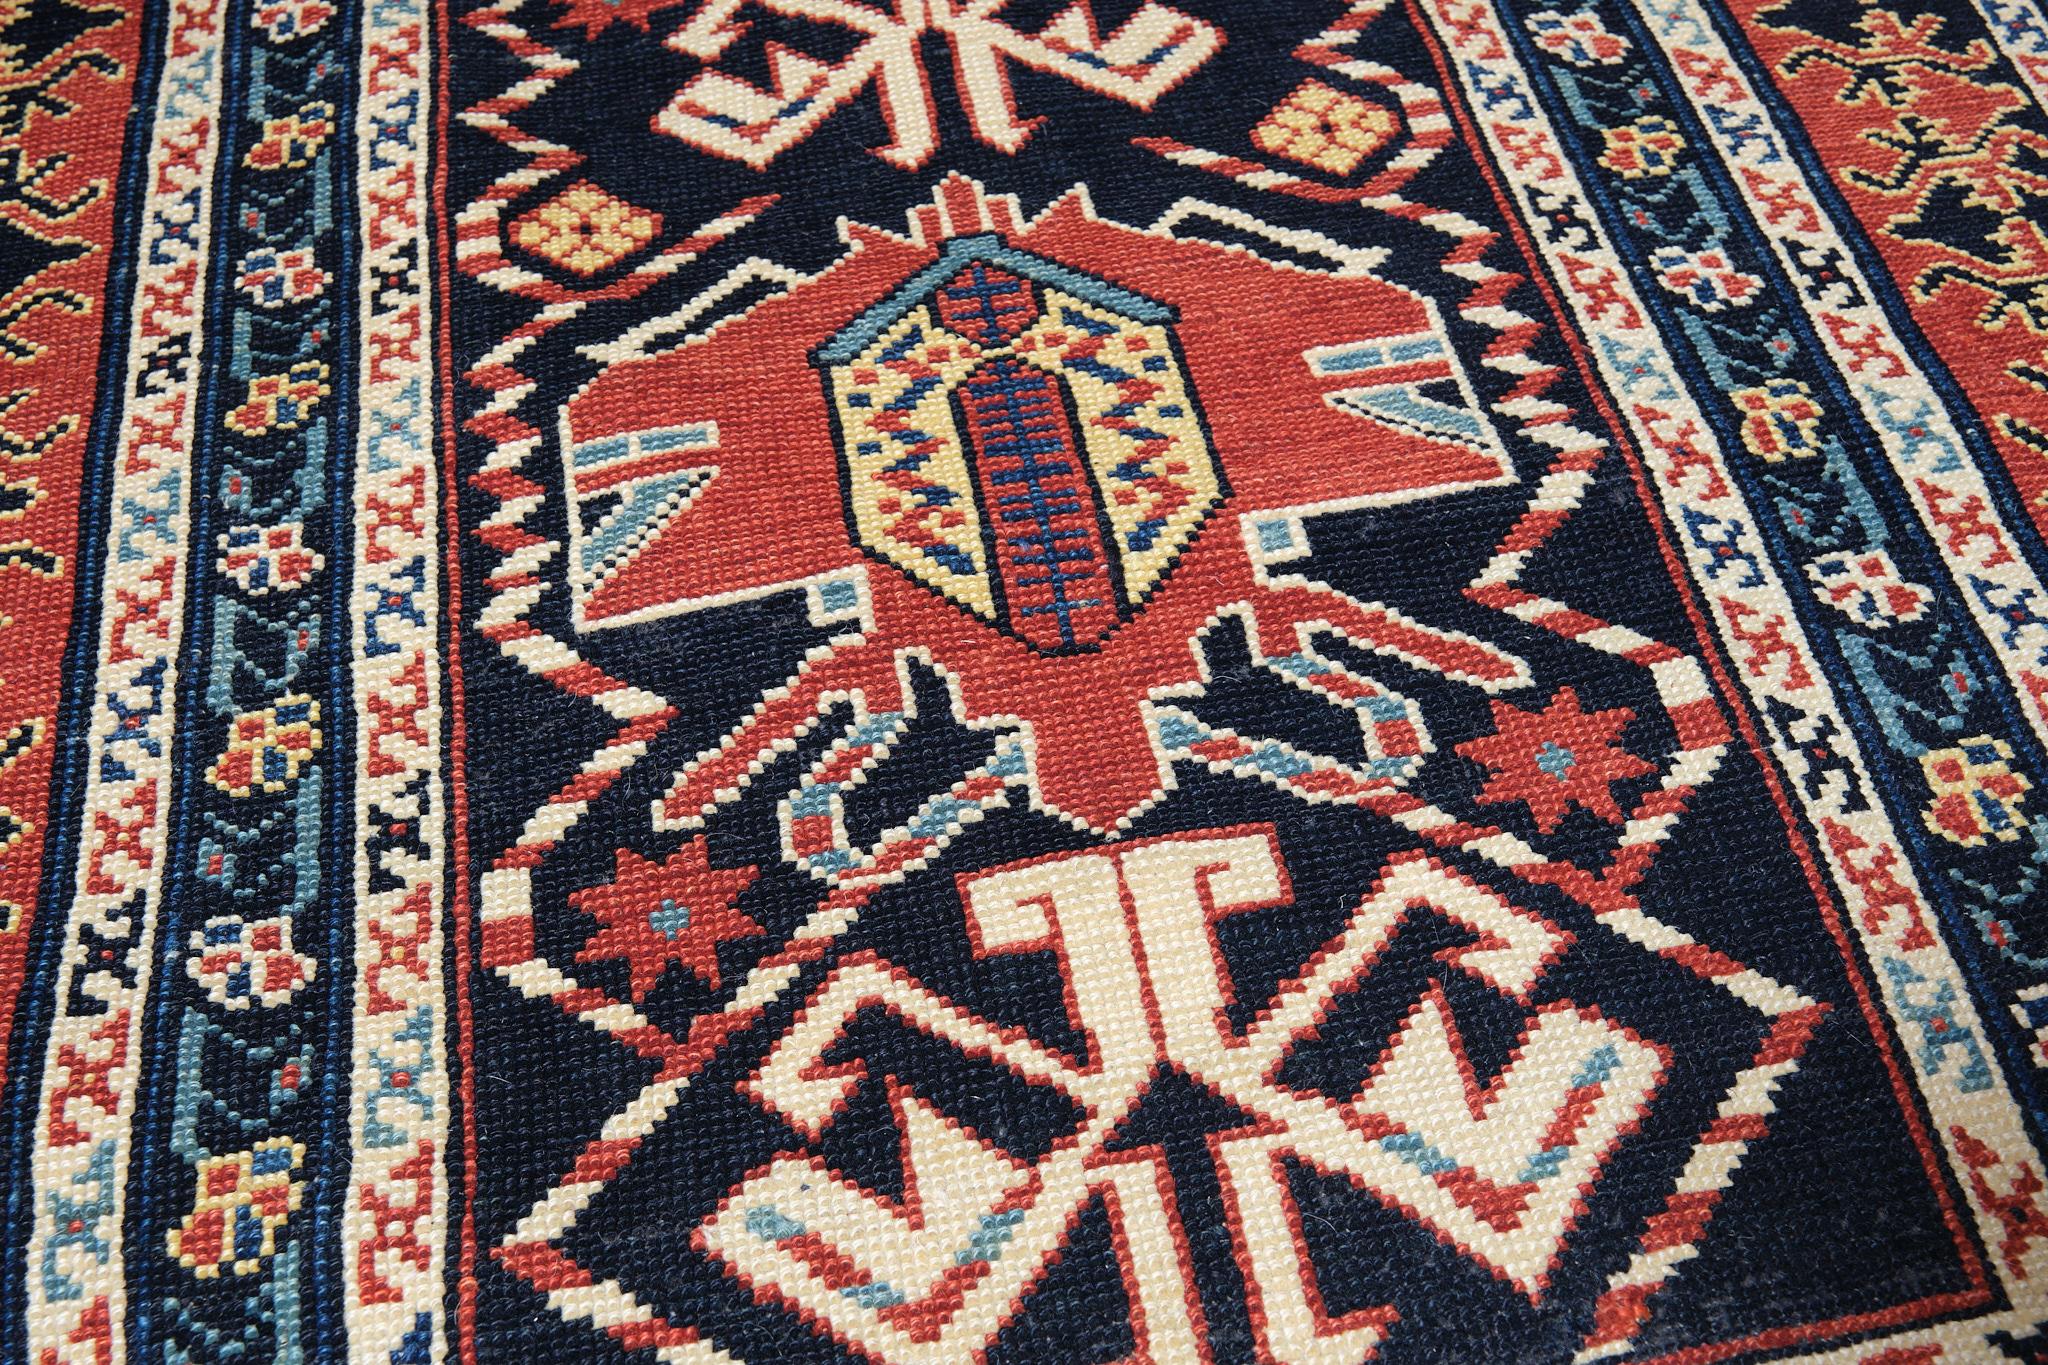 The source of the rug comes from the book Oriental Rugs Volume 1 Caucasian, Ian Bennett, Oriental Textile Press, Aberdeen 1993, pg.244. This is a single vertical palmette design rug from the early 19th century, Kuba region, Caucasus area. This is an